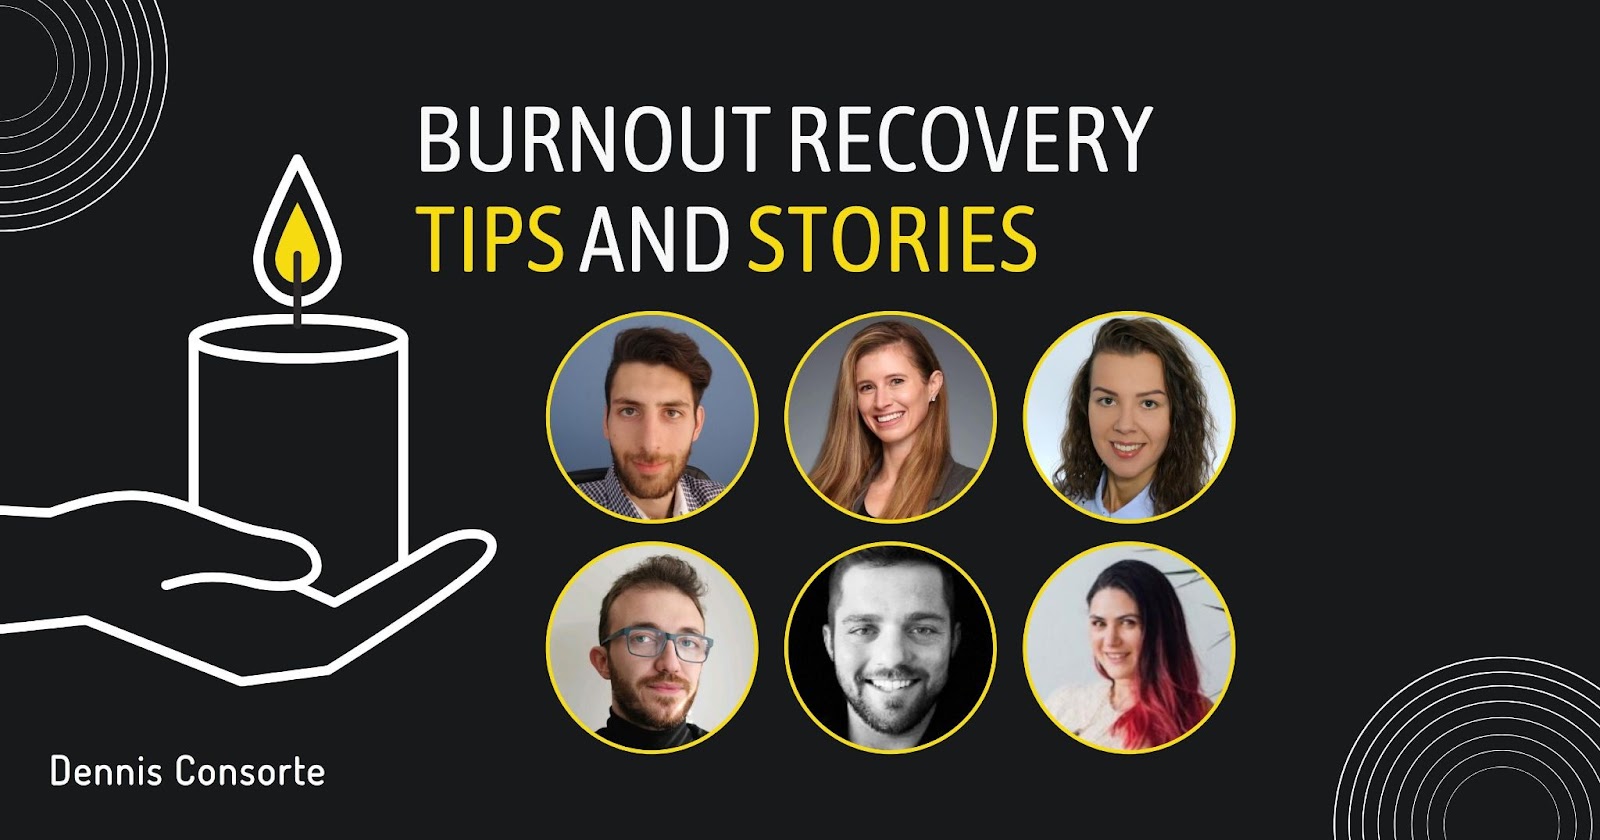 9 Burnout Recovery Tips and Stories